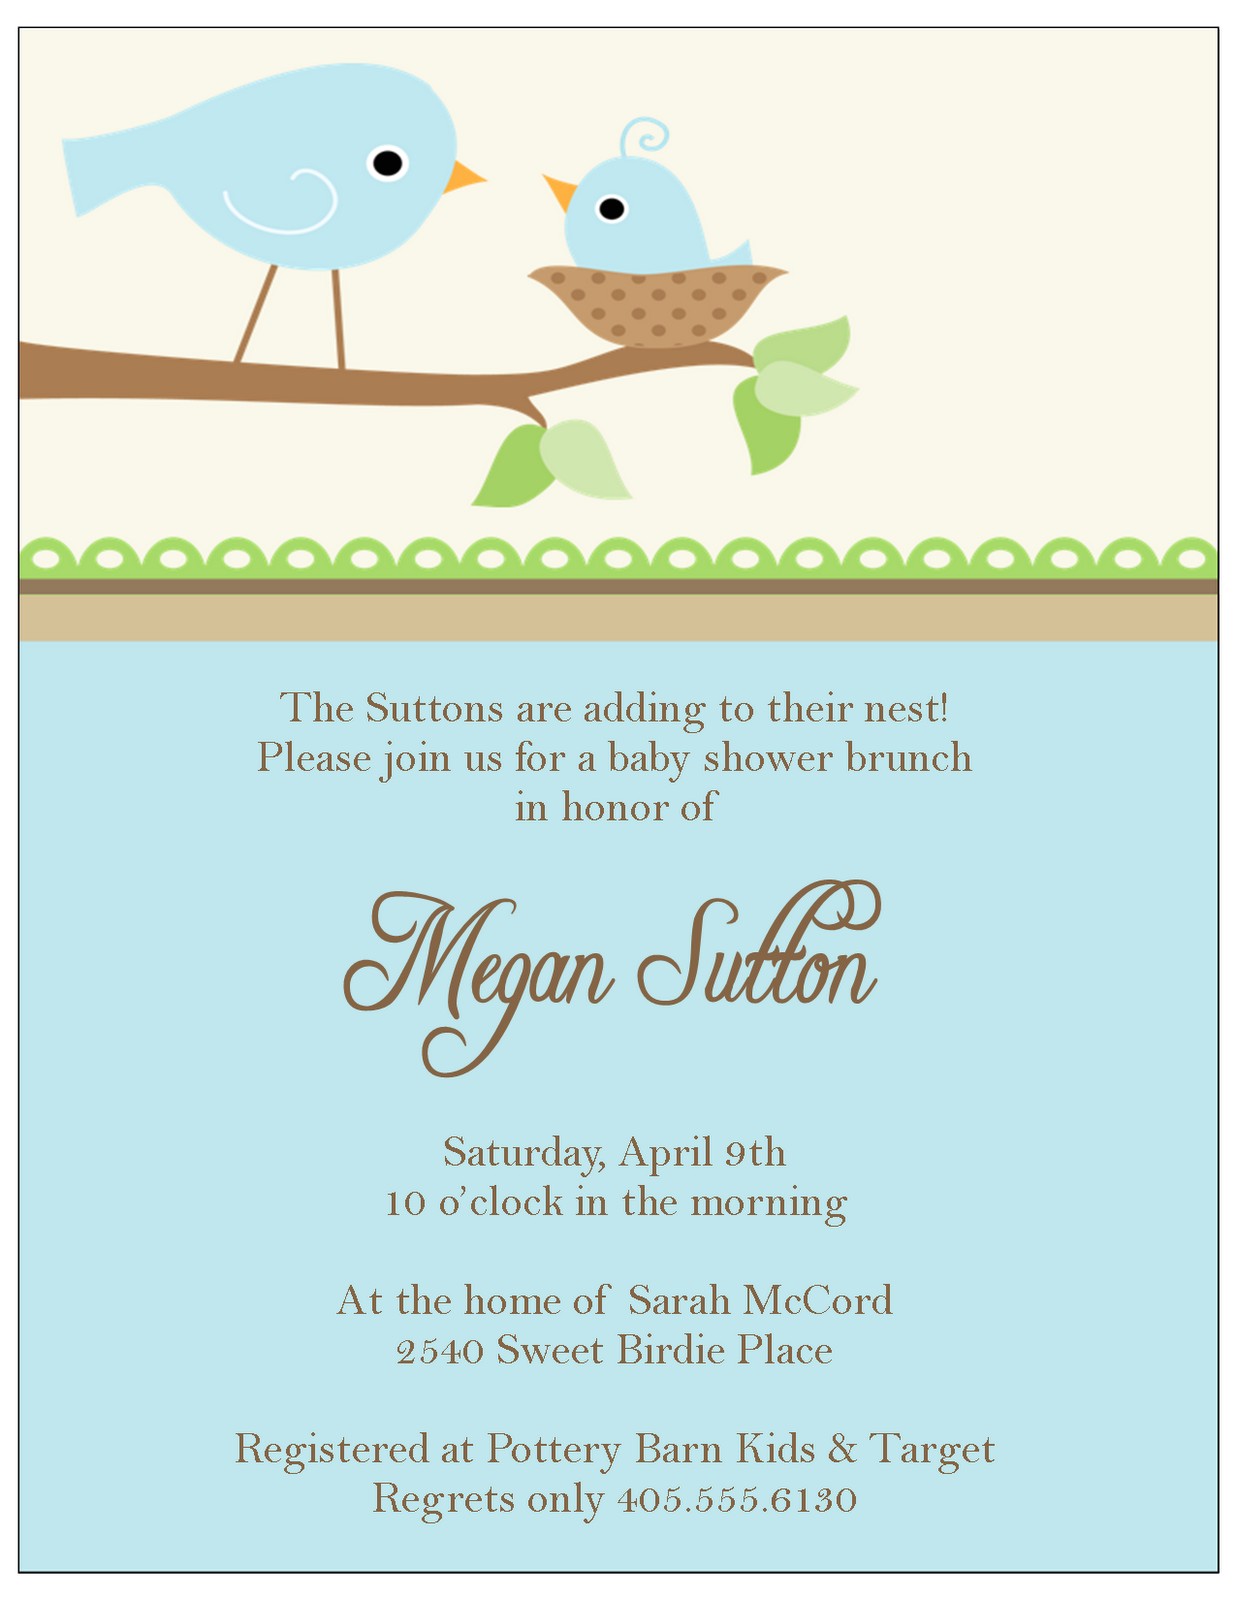 couples baby shower invitations